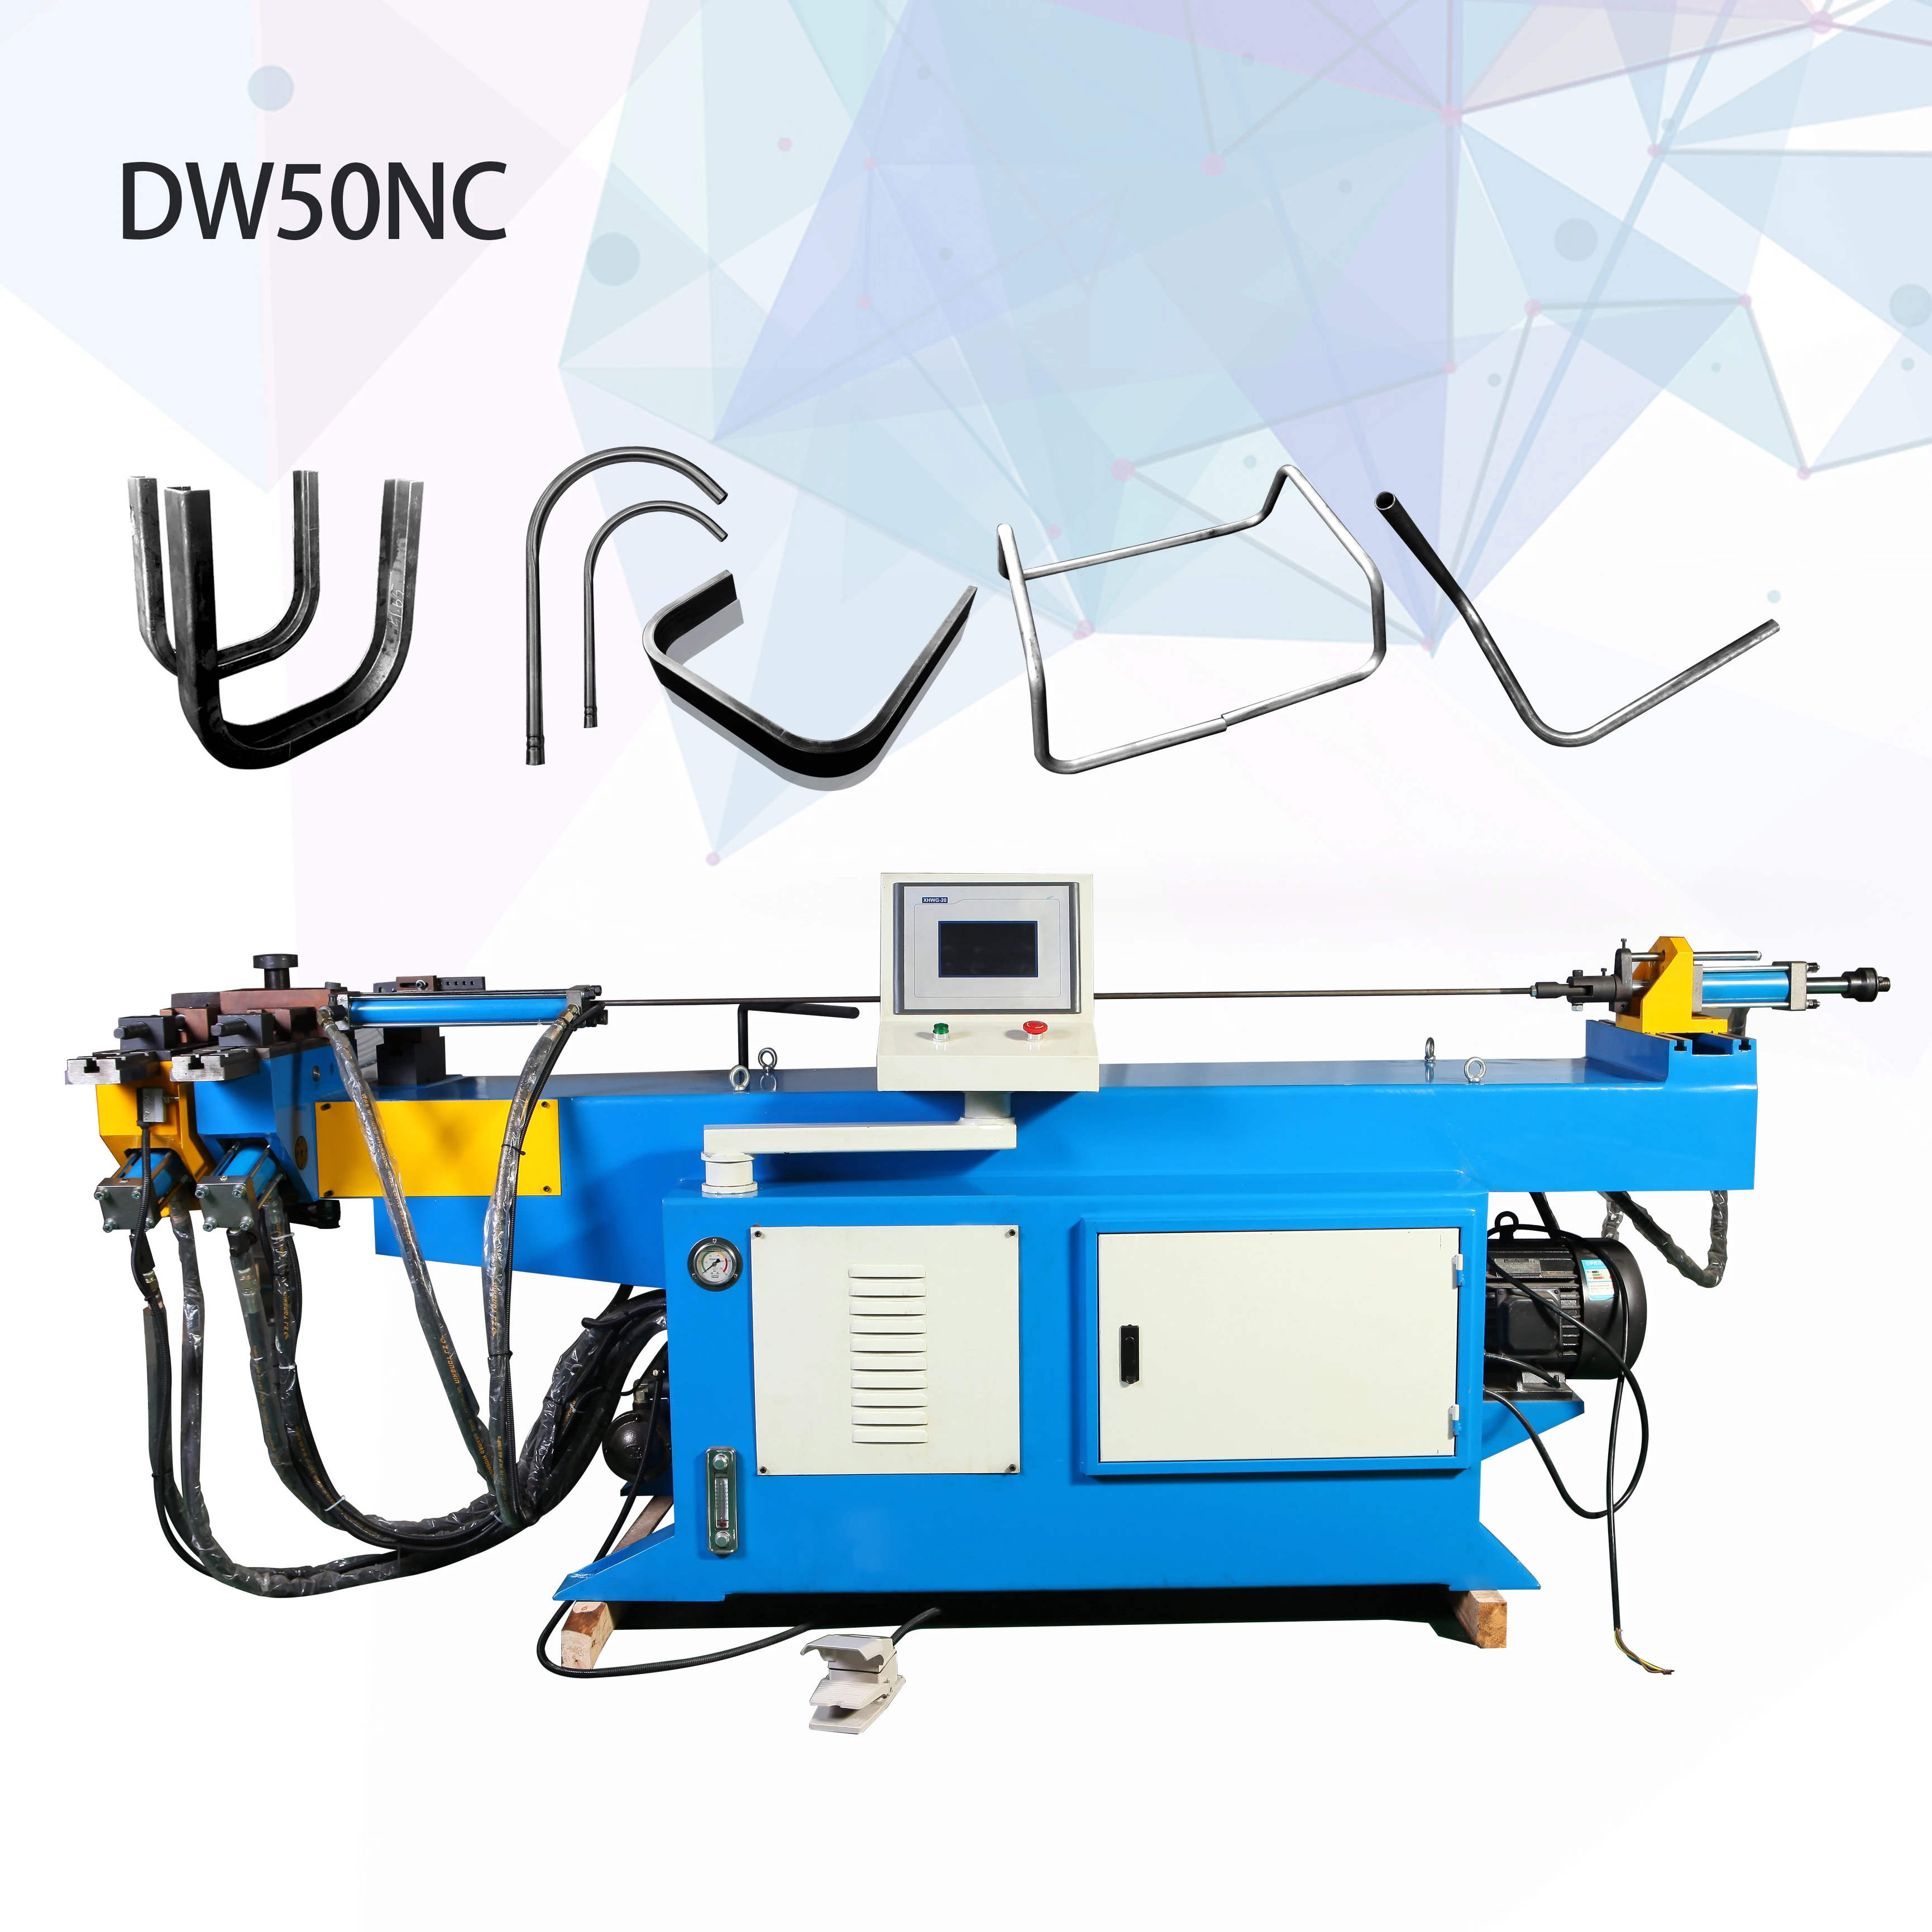 Pipe and tube bending machine DW50NC semi-automatic new 2021 product